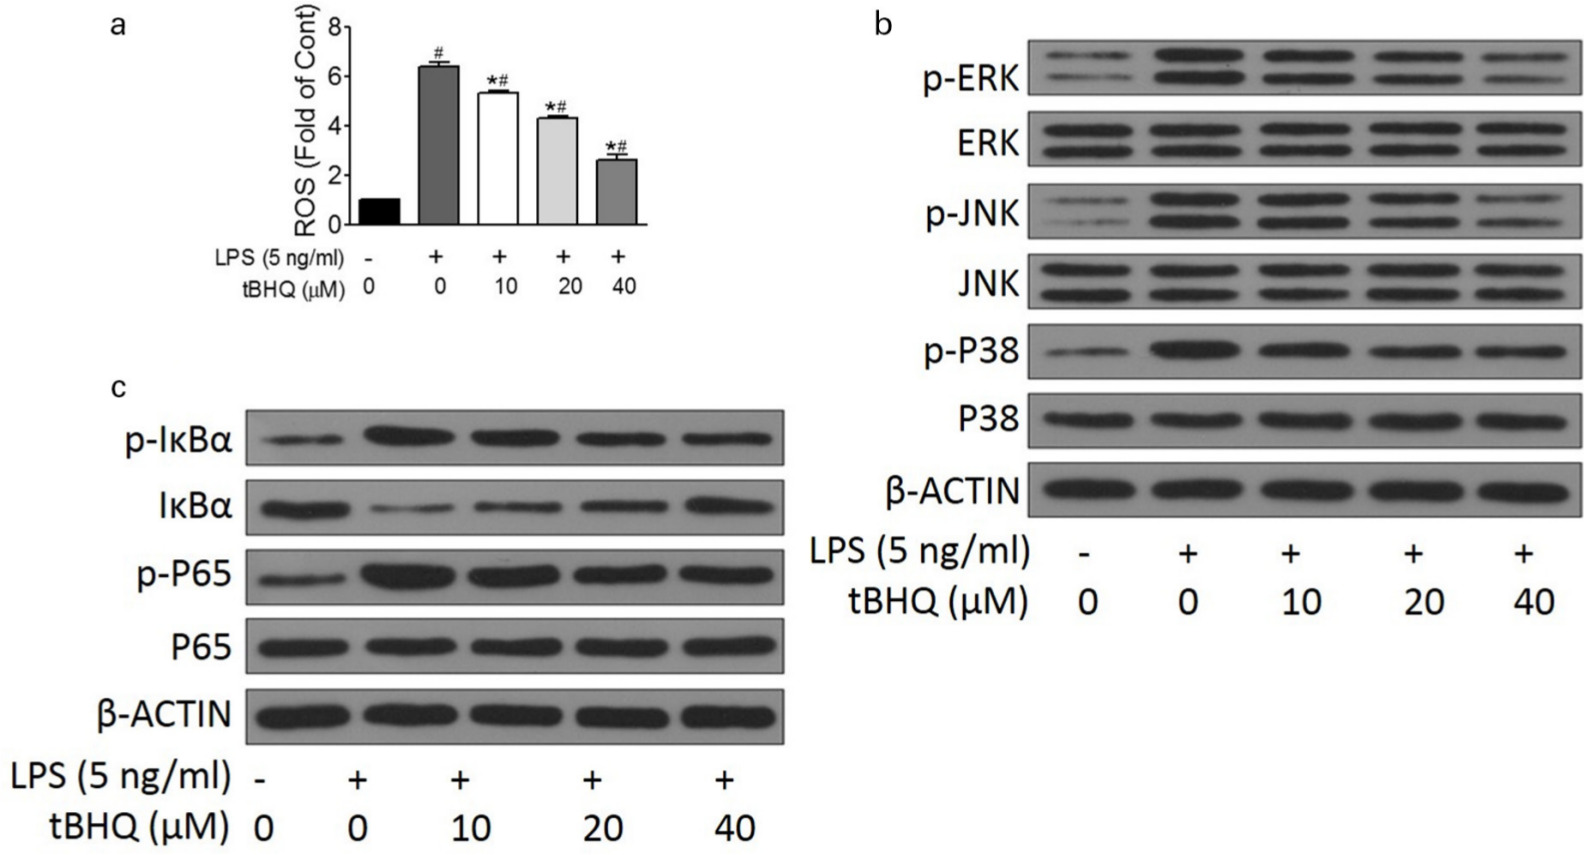 Fig. 4 
            Tert-butylhydroquinone (tBHQ) inhibited LPS-induced activation of NF-κB and MAPK signalling pathways. Chondrocytes were treated with LPS (5 ng/ml) for 24 hours and then treated with different concentrations of tBHQ (10, 20, and 40 μM) for 12 hours. a) Reactive oxygen species (ROS) levels were detected by flow cytometry. b) The protein levels of p-ERK, ERK, p-JNK, JNK, p-P38, and P38 were detected by western blot. c) The protein levels of p-IκBα, IκBα, p-P65, and P65 were detected by western blot. Each experiment was repeated three times. Difference among multiple groups was explored by one-way analysis of variance followed by a post hoc test. *p < 0.05 vs 5 ng/ml LPS group, #p < 0.05 vs control group without LPS and tBHQ.
          